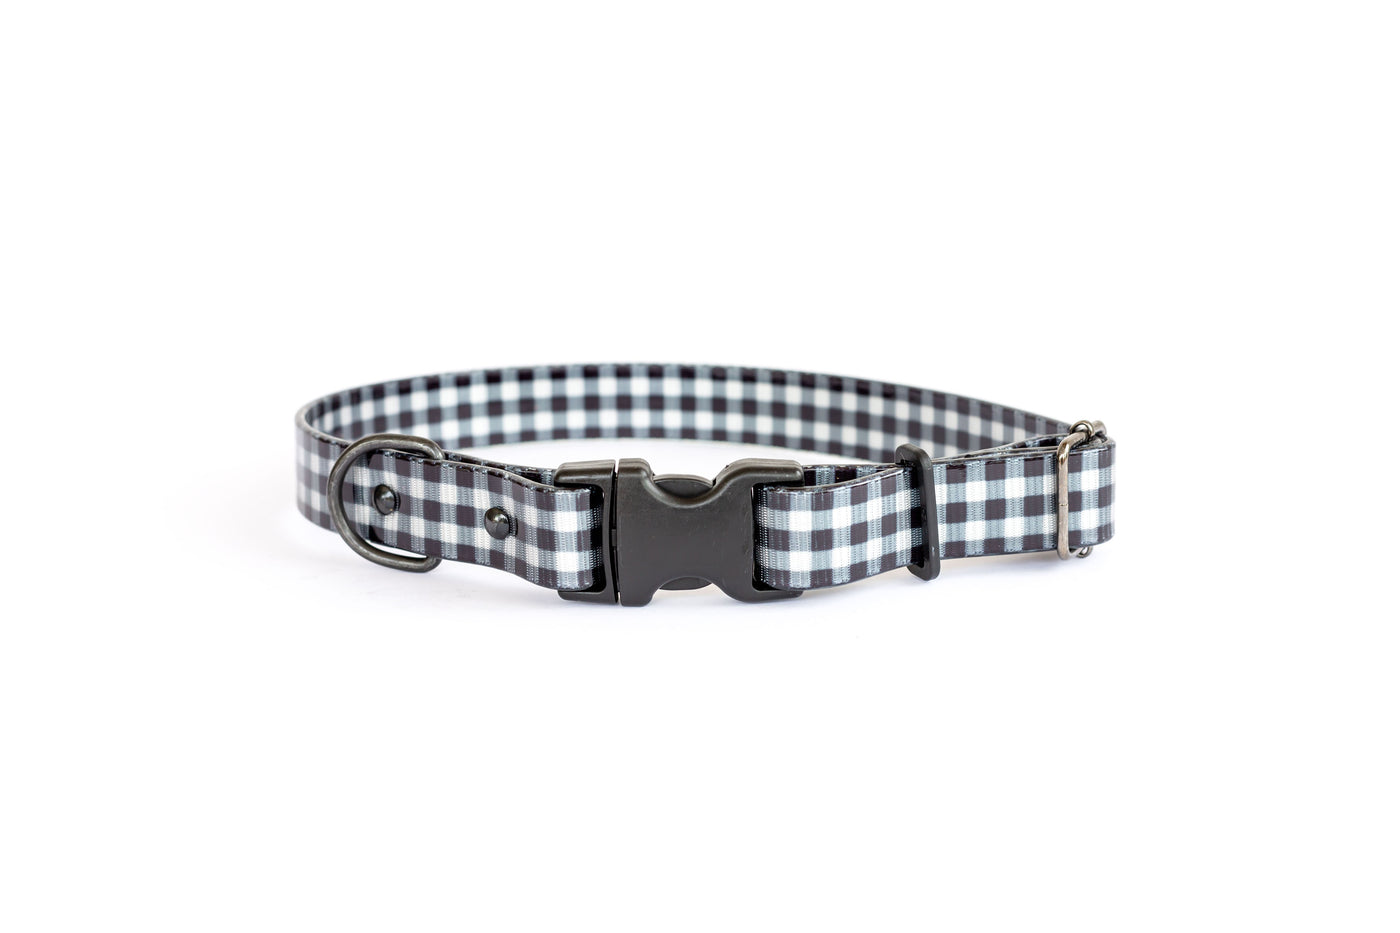 Euro Dog Waterproof Nylon Dog Collar Quick Release Buckle Durable Made in USA TPU Coated Affordable Luxury